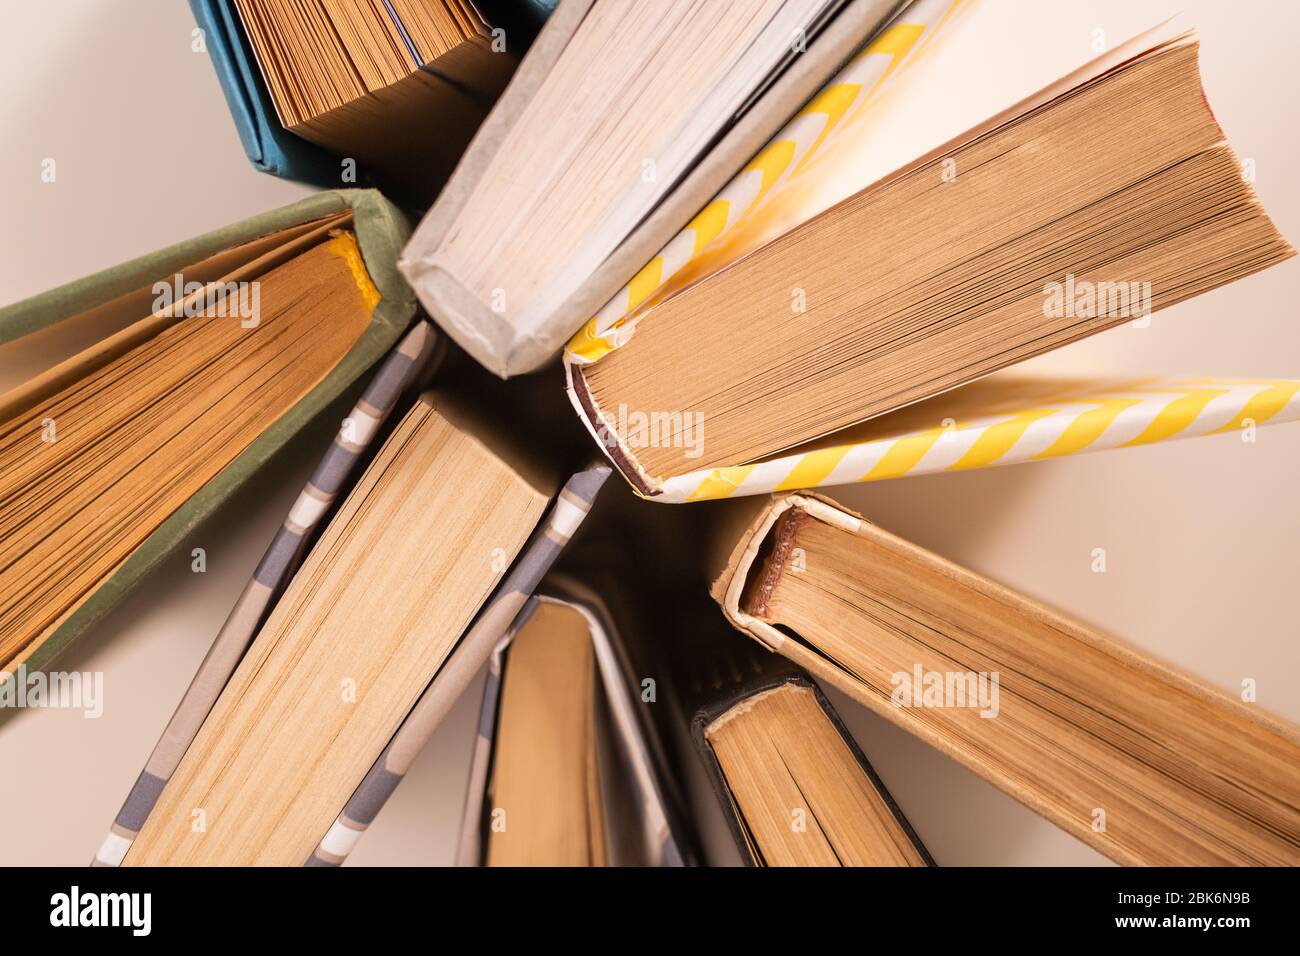 Flat layout of several books in paper covers on white desk that can be used as background for school or educational subject Stock Photo